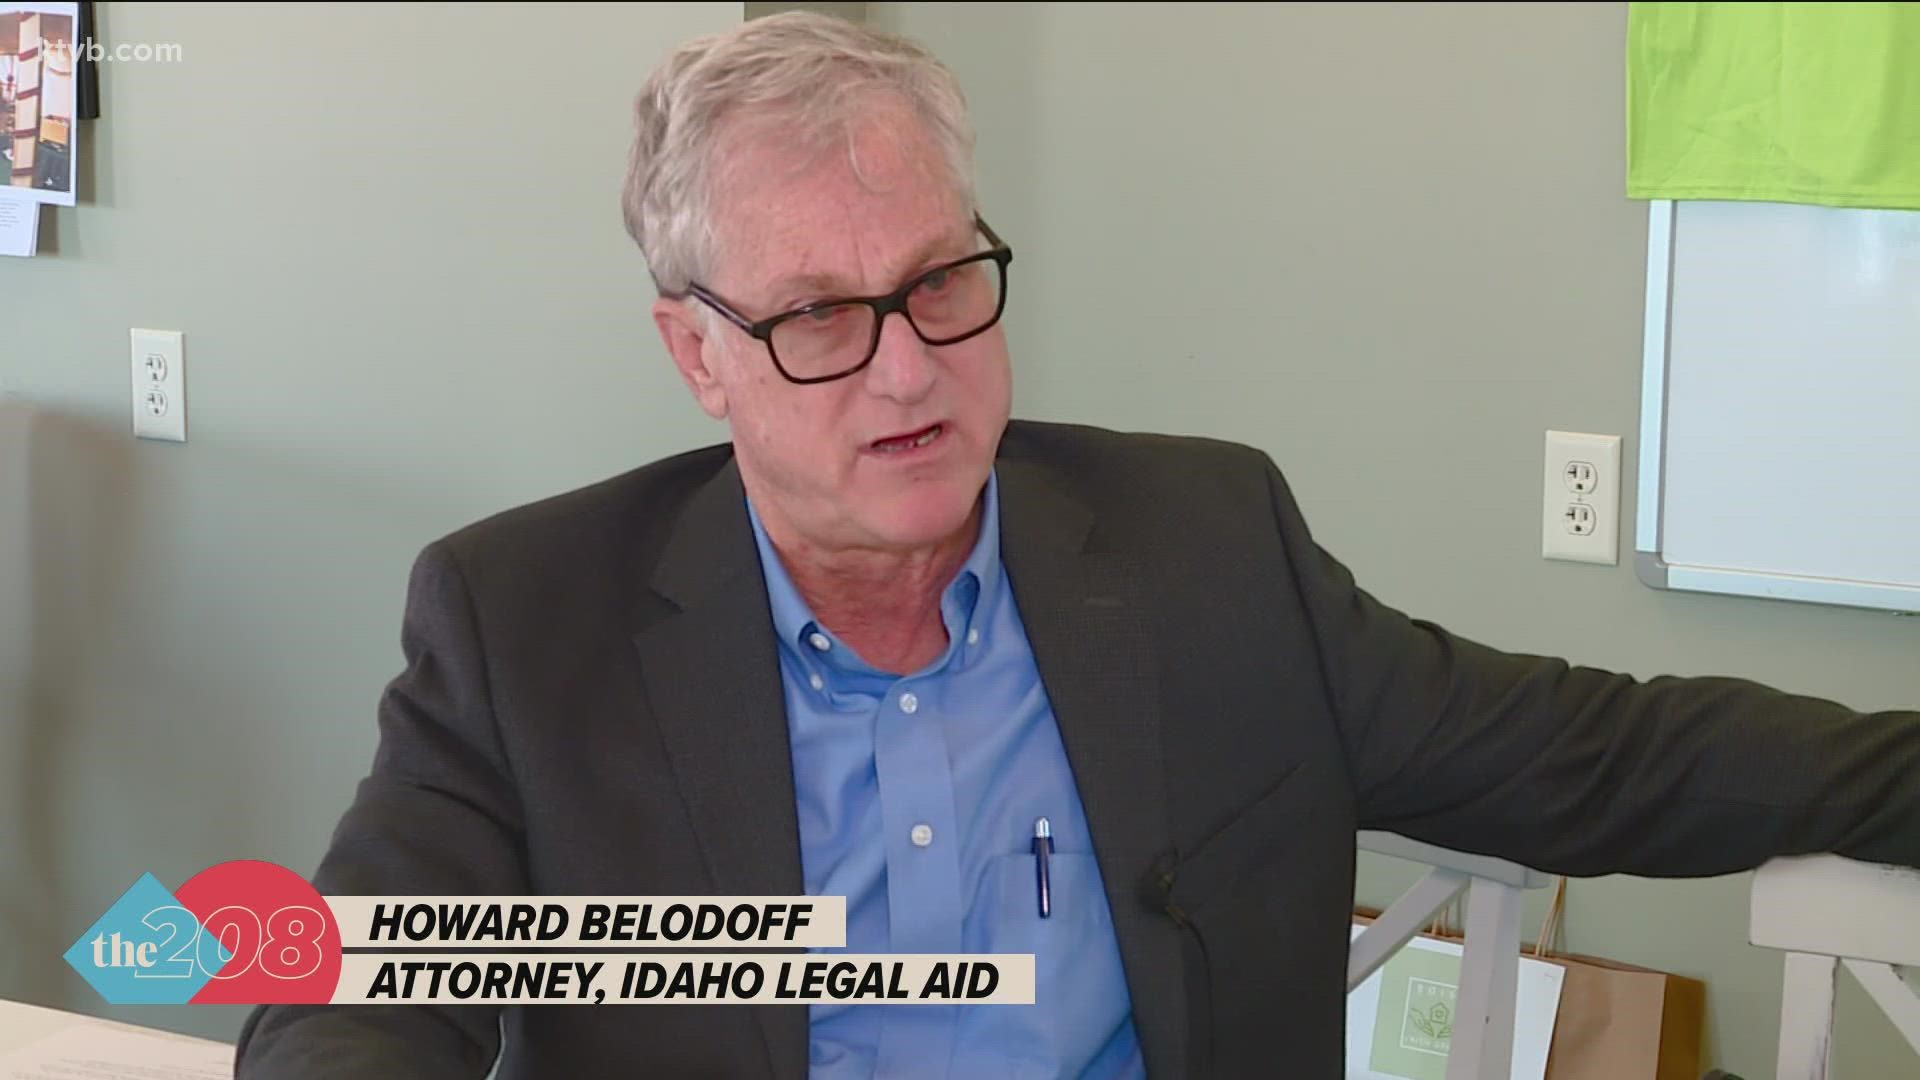 "The government cannot punish homeless people for the status of being homeless," Attorney Howard Belodoff said, "they are dehumanizing the homeless population."